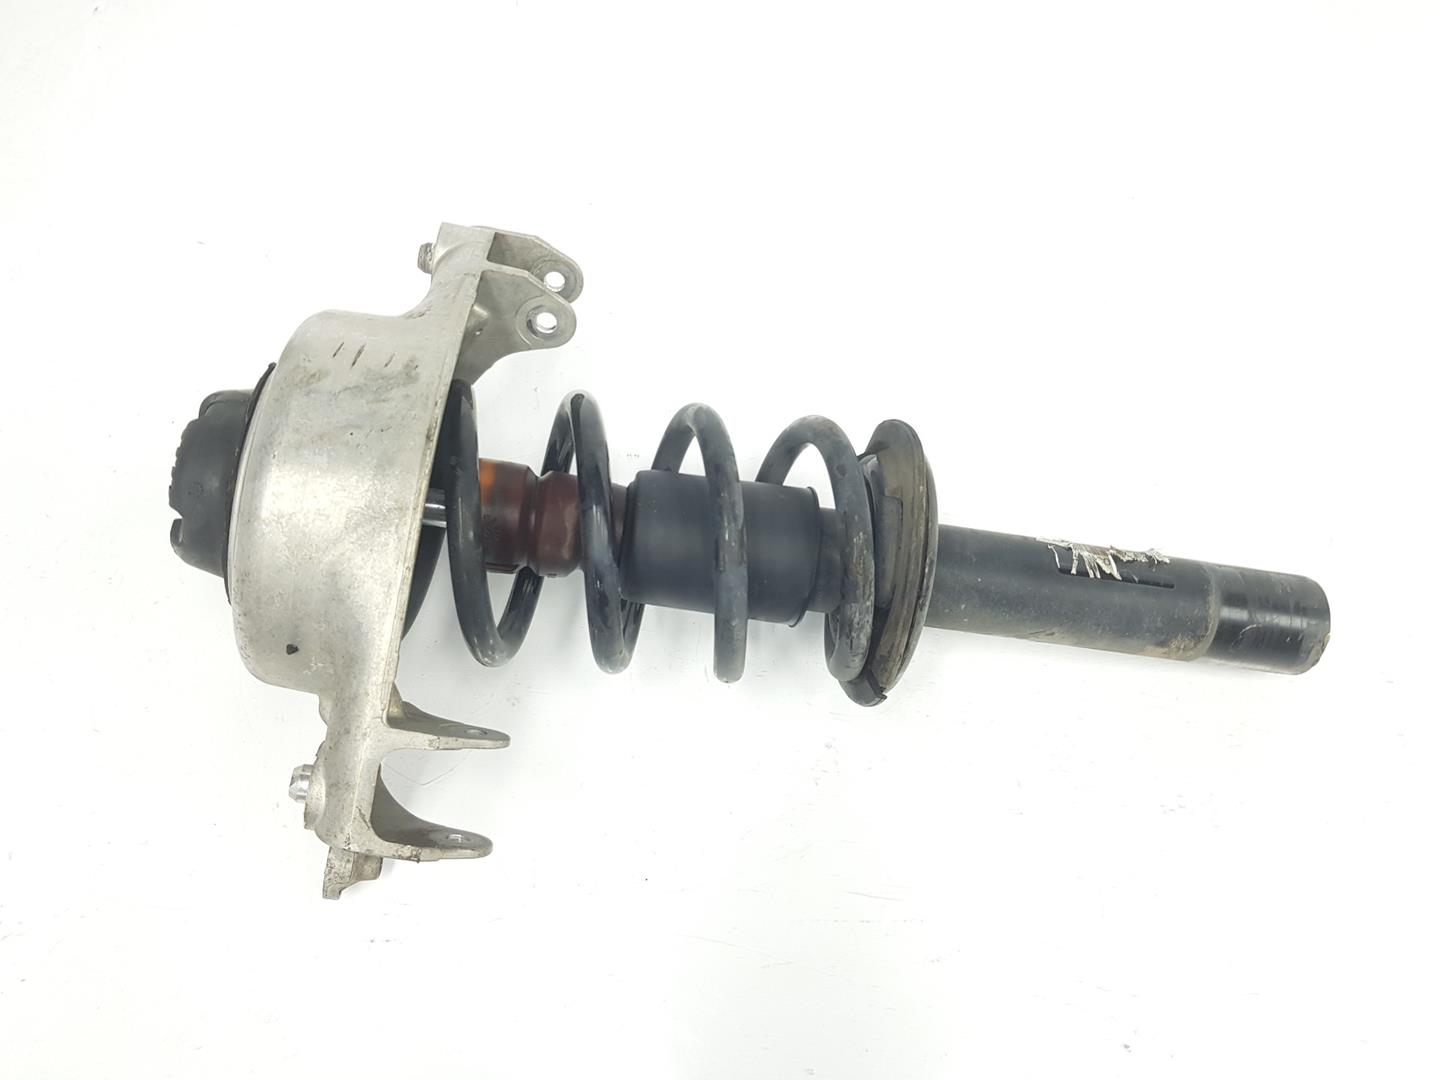 AUDI A6 C6/4F (2004-2011) Front Right Shock Absorber 8R0413031F, 8K0412392F 19907602